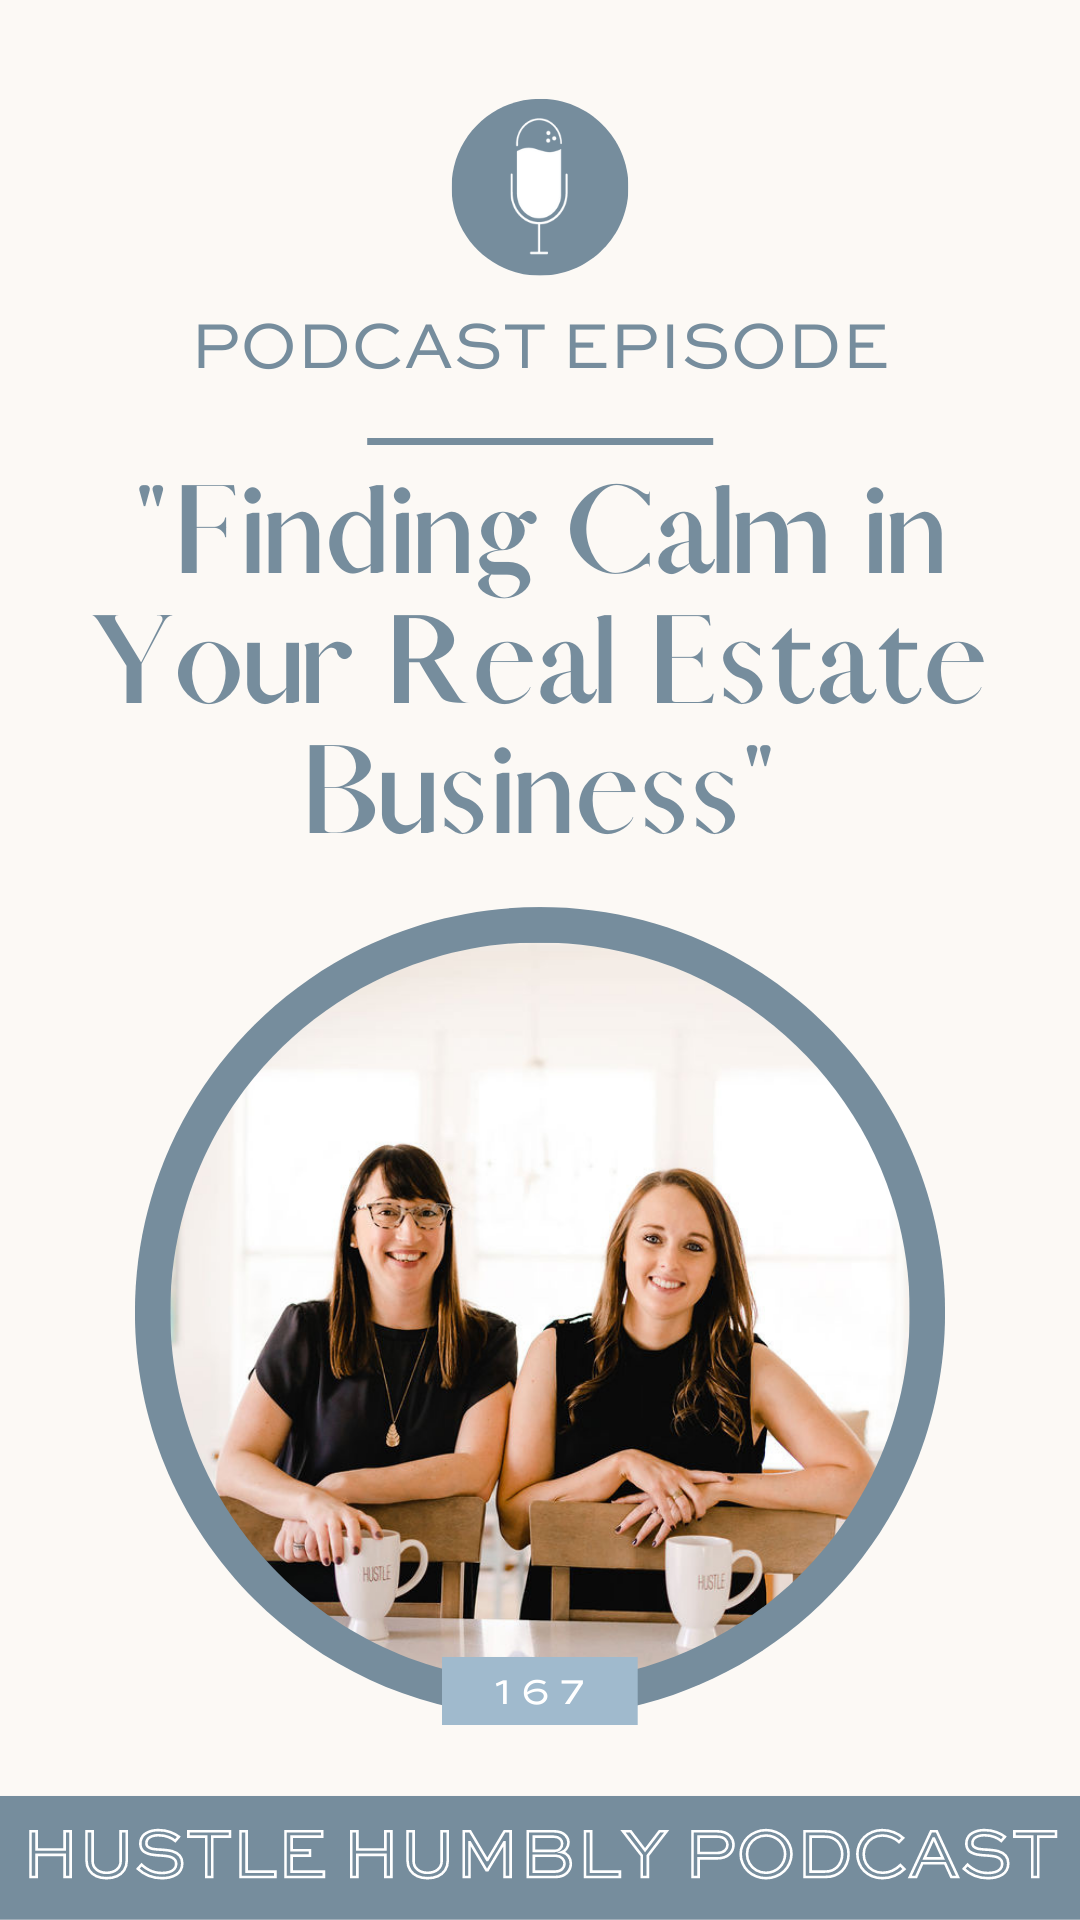 Hustle Humbly Podcast Episode 167: Finding Calm in Your Real Estate Business